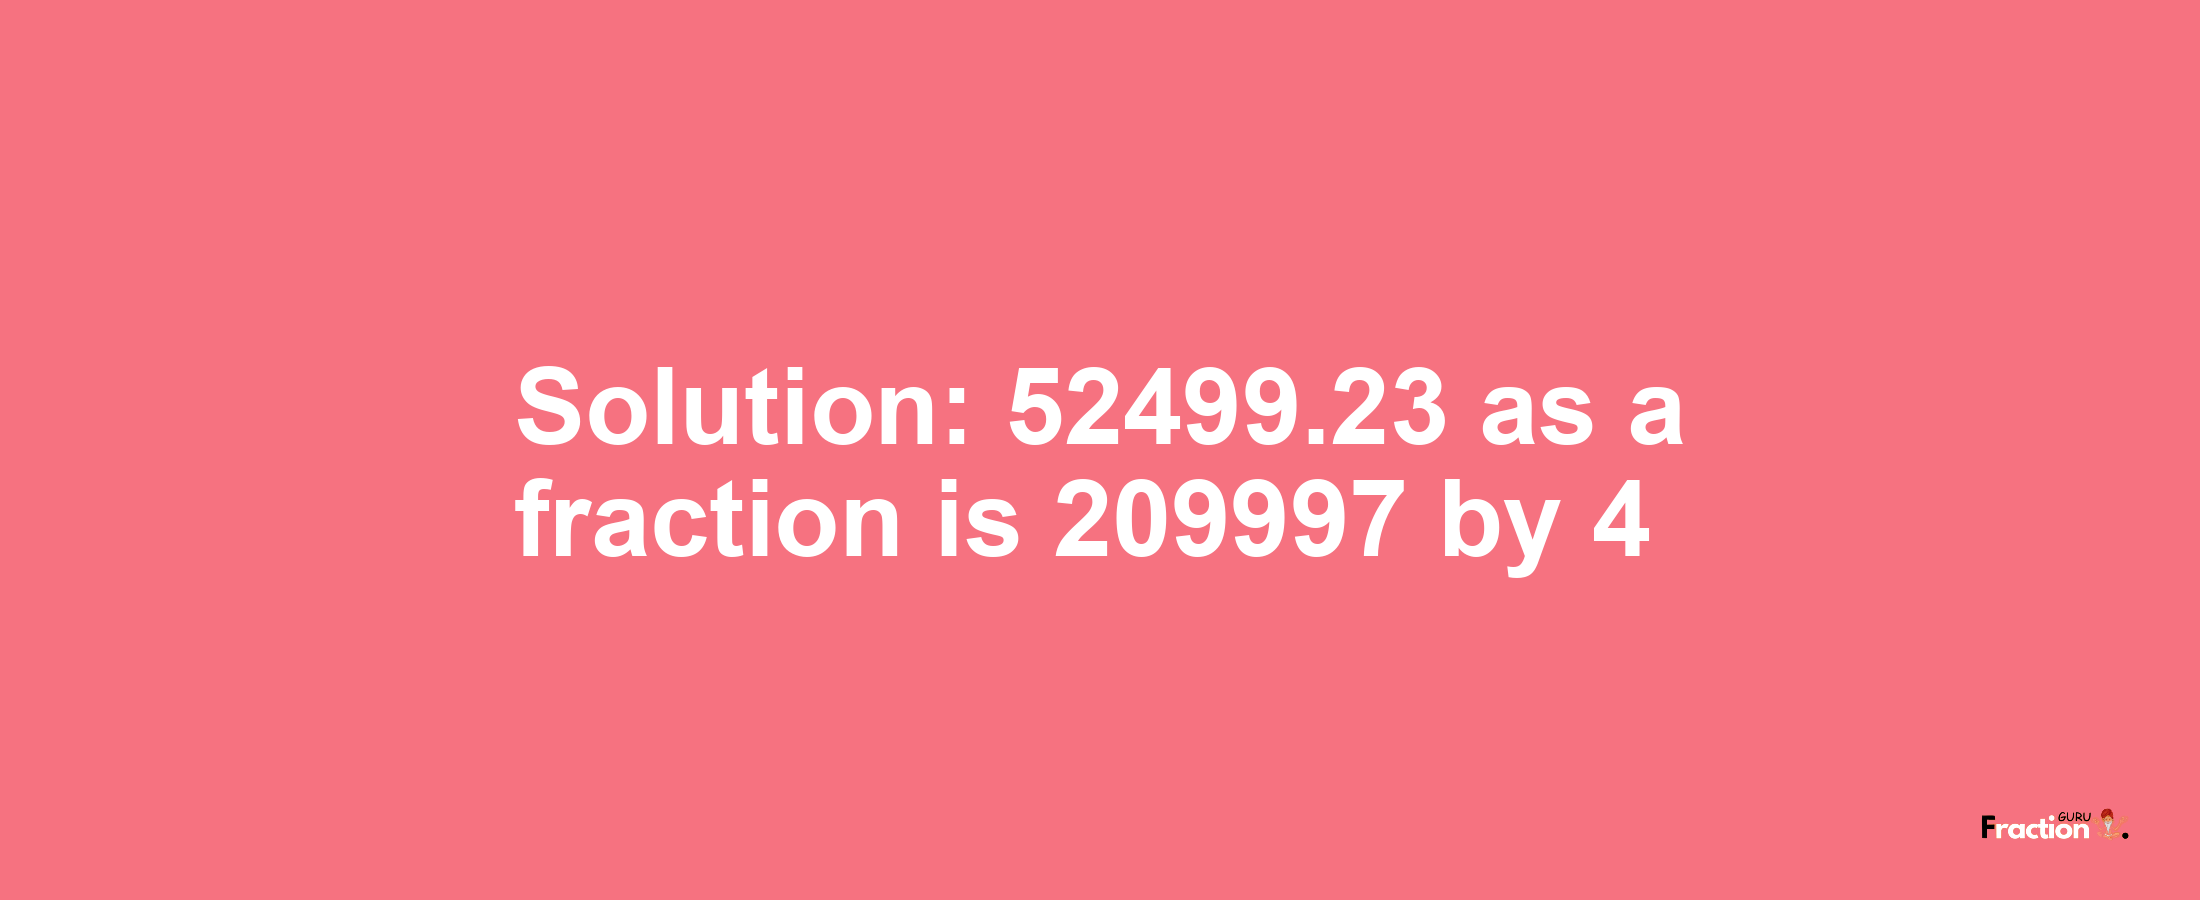 Solution:52499.23 as a fraction is 209997/4